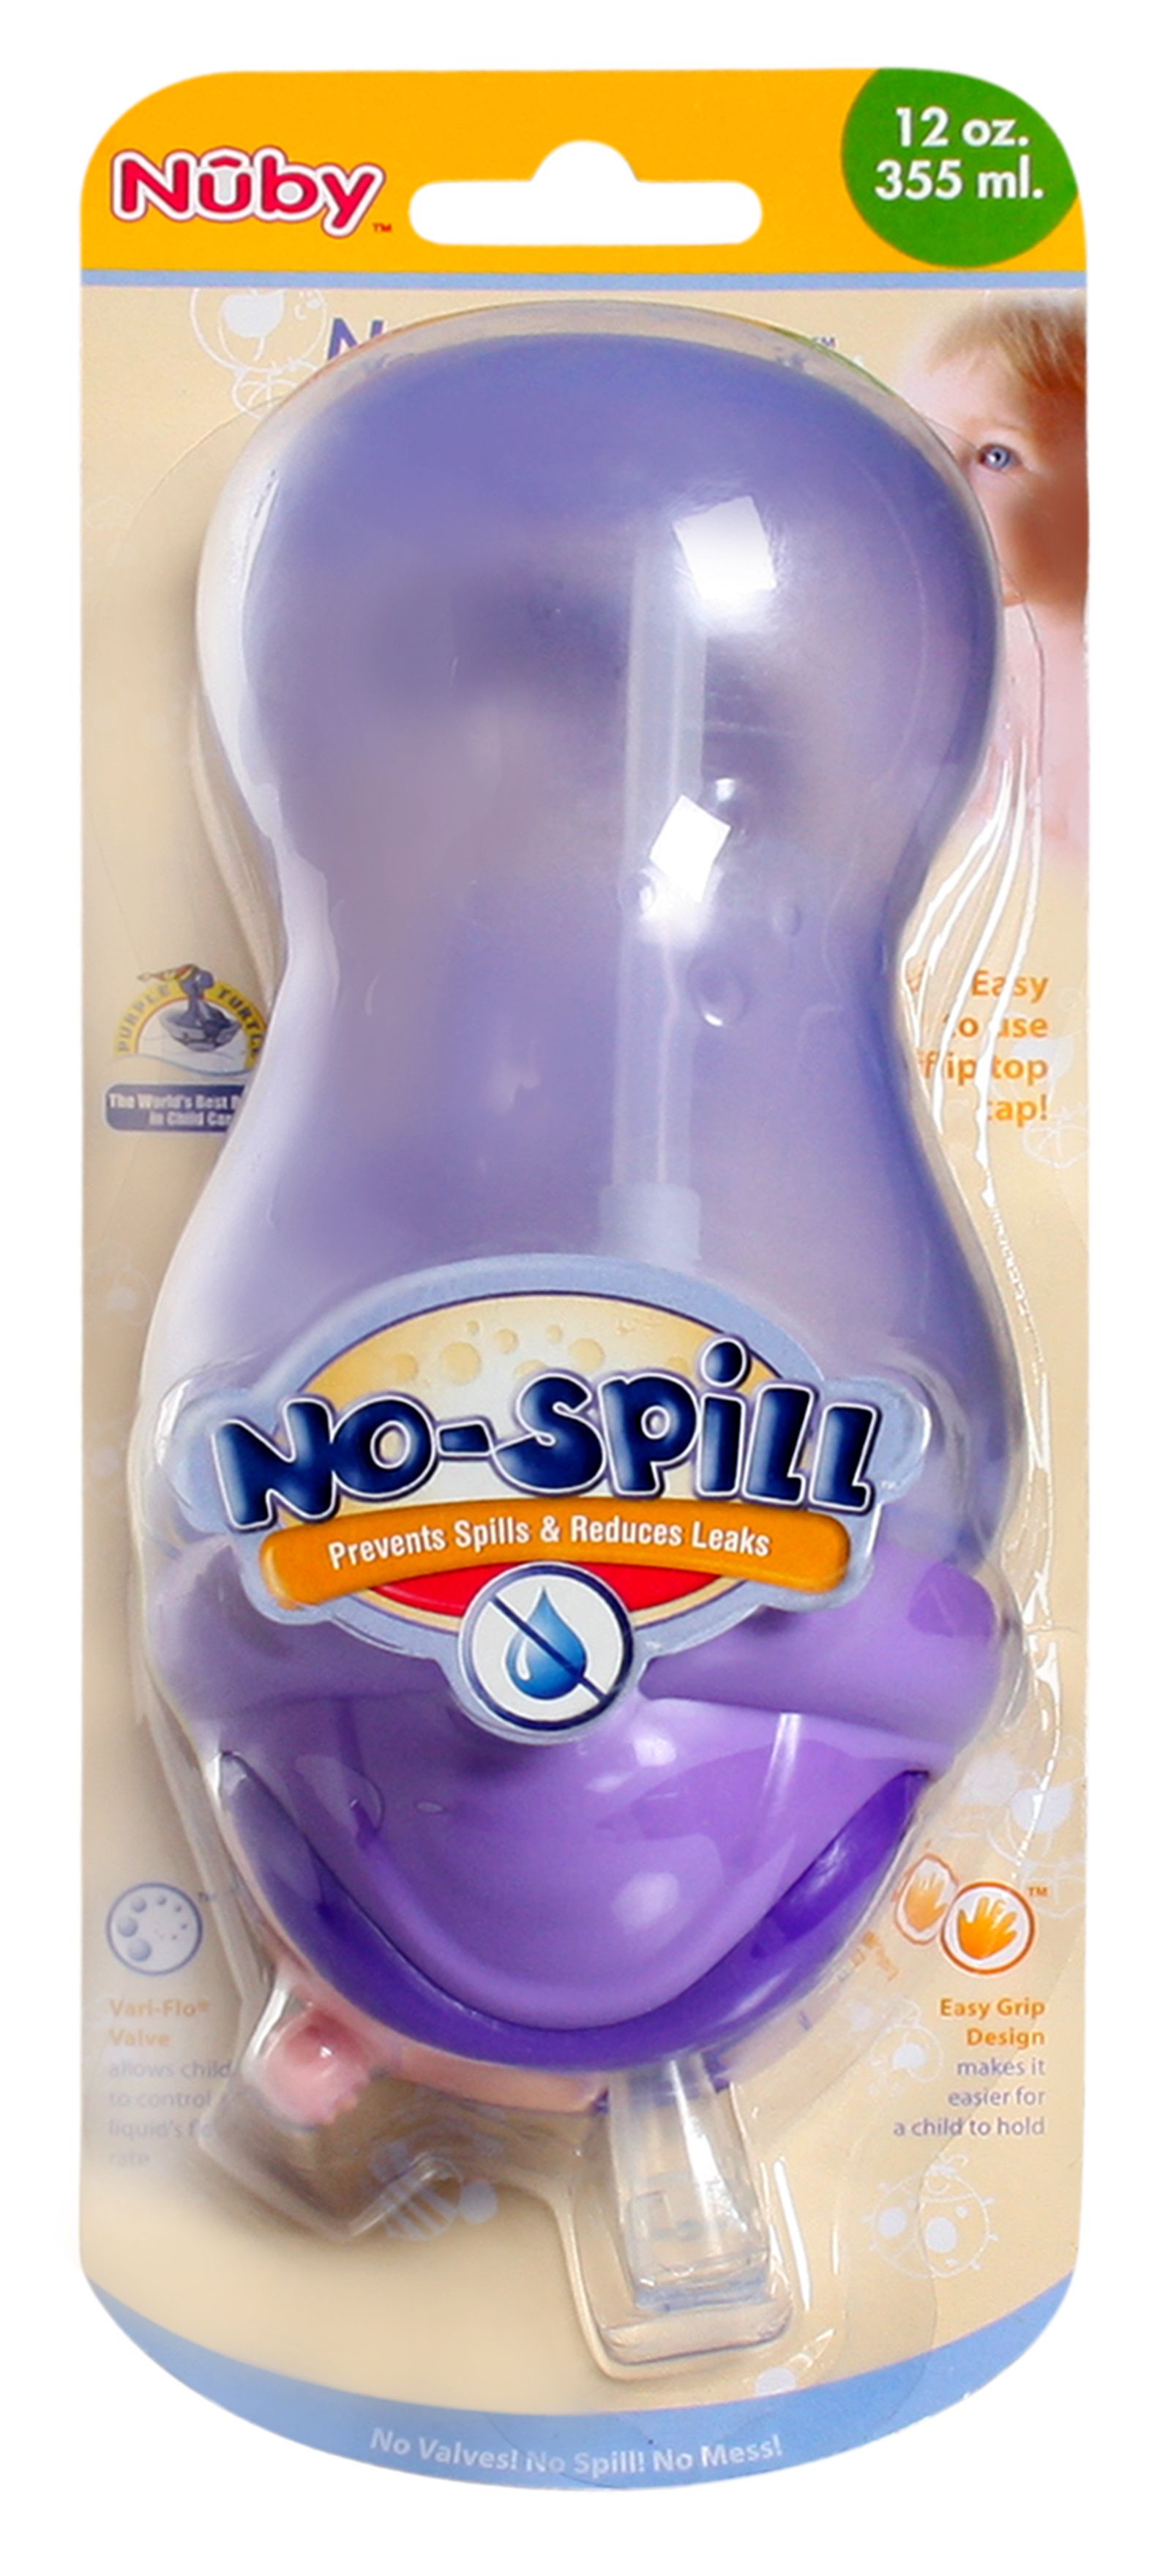 Nuby - No-Spill Flip it with soft silicone straw